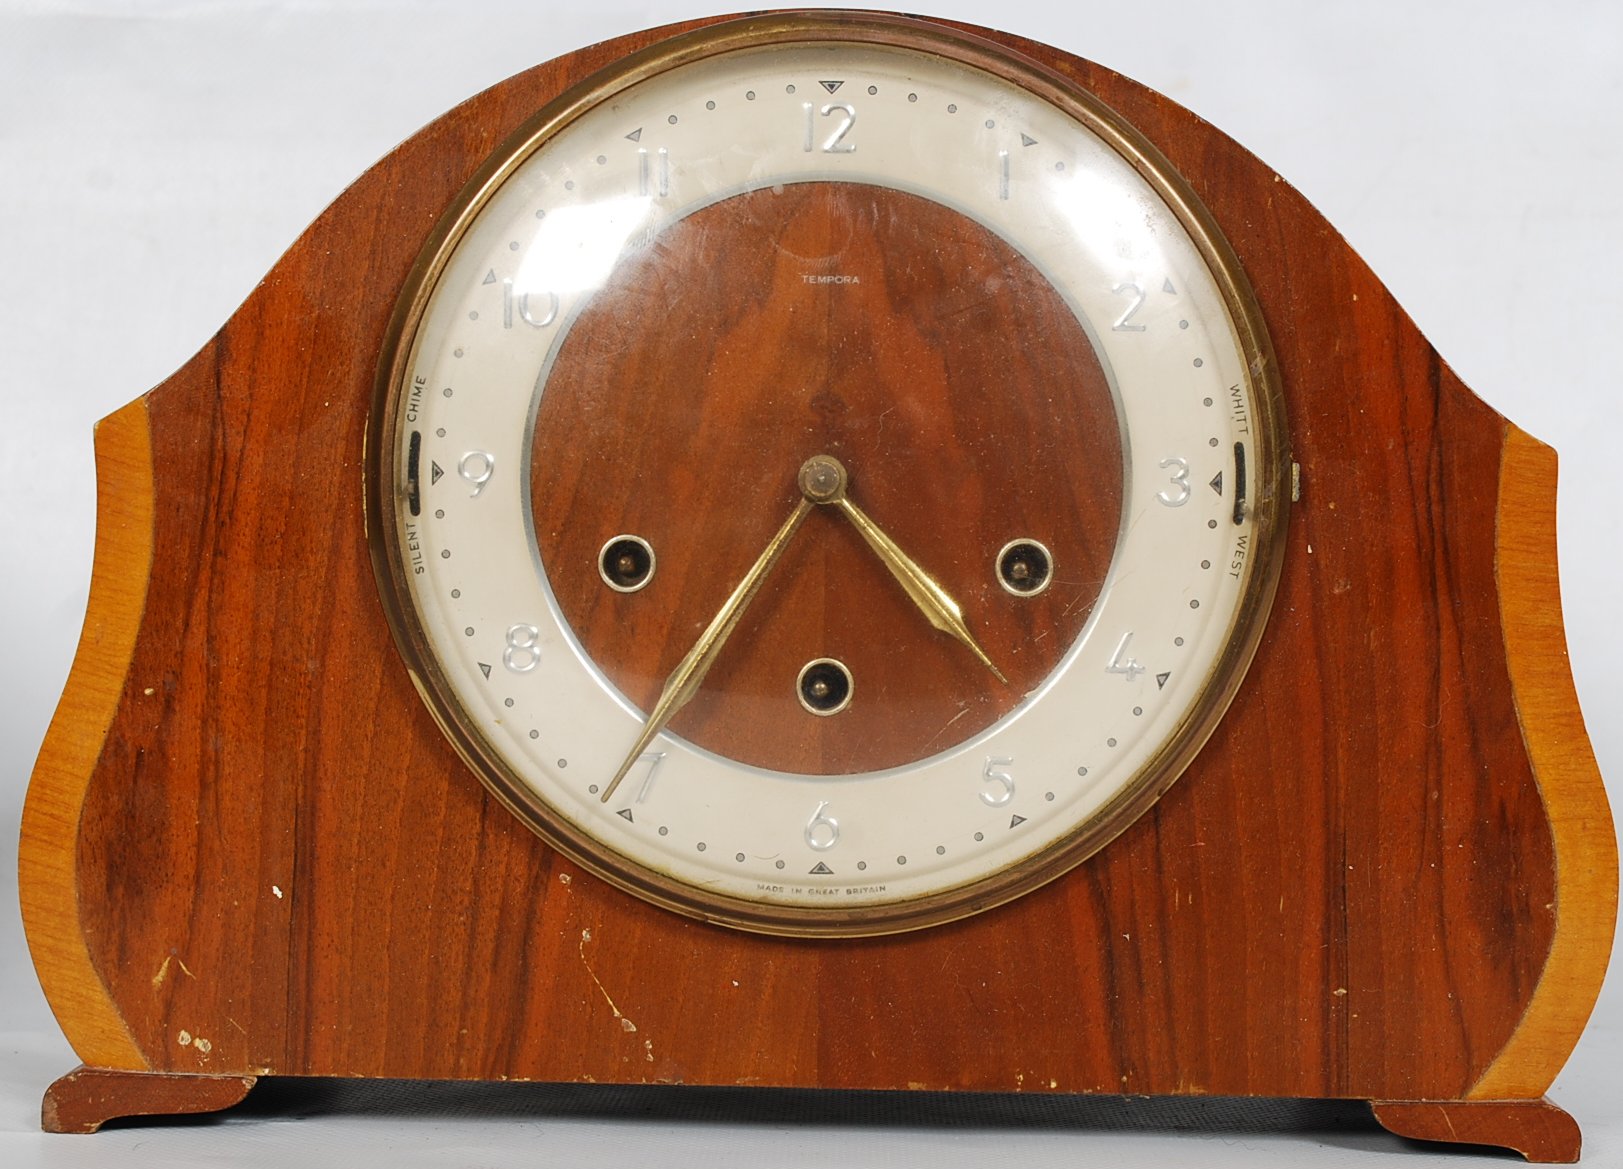 A 1930's Art Deco walnut mantle clock by Tempora with Westminster chiming movement by Smiths.